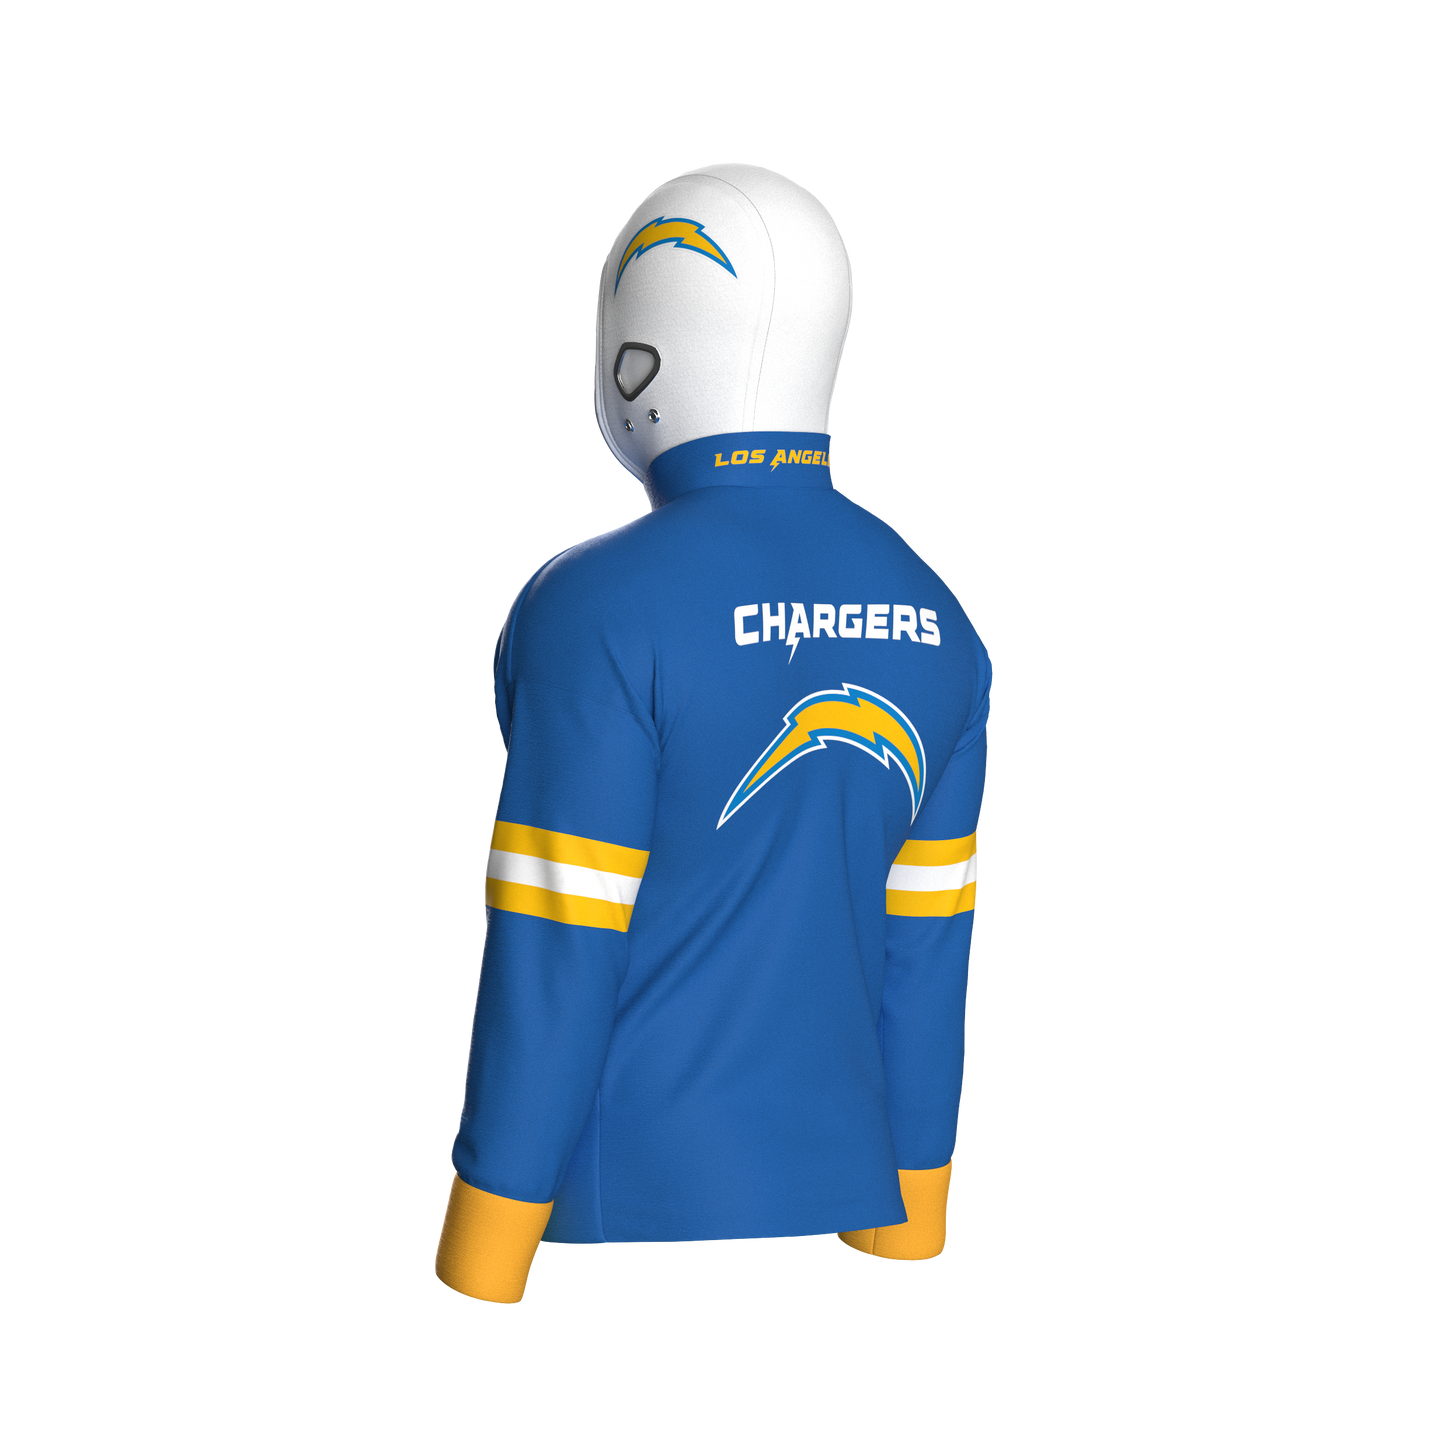 Los Angeles Chargers Home Zip-Up (adult)